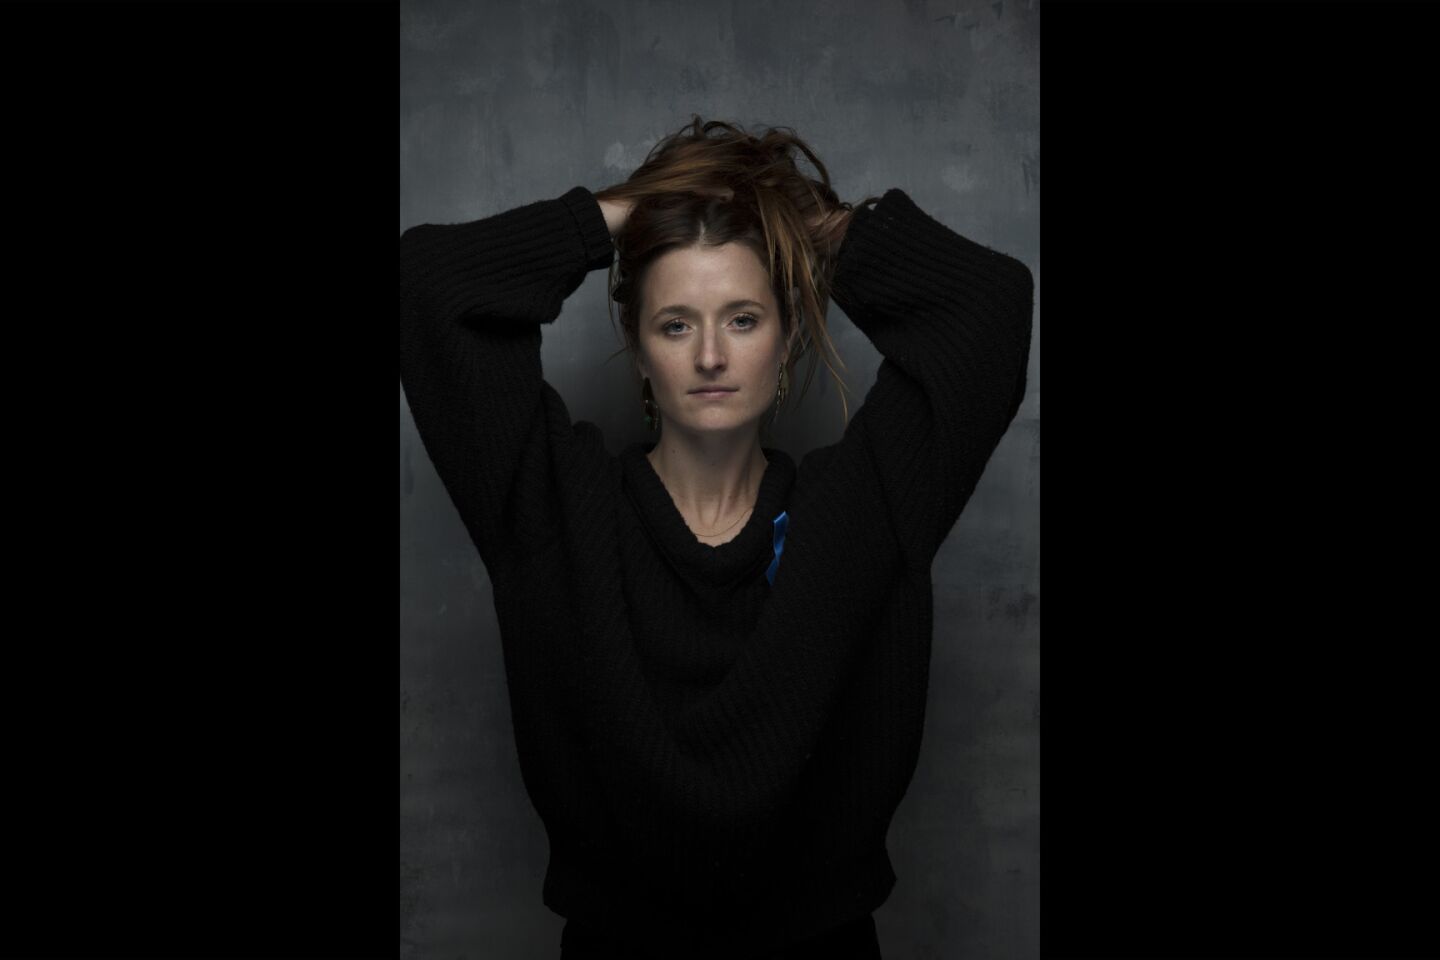 Grace Gummer from the film "The Long Dumb Road," photographed in the L.A. Times studio in Park City, Utah. FULL COVERAGE: Sundance Film Festival 2018 »